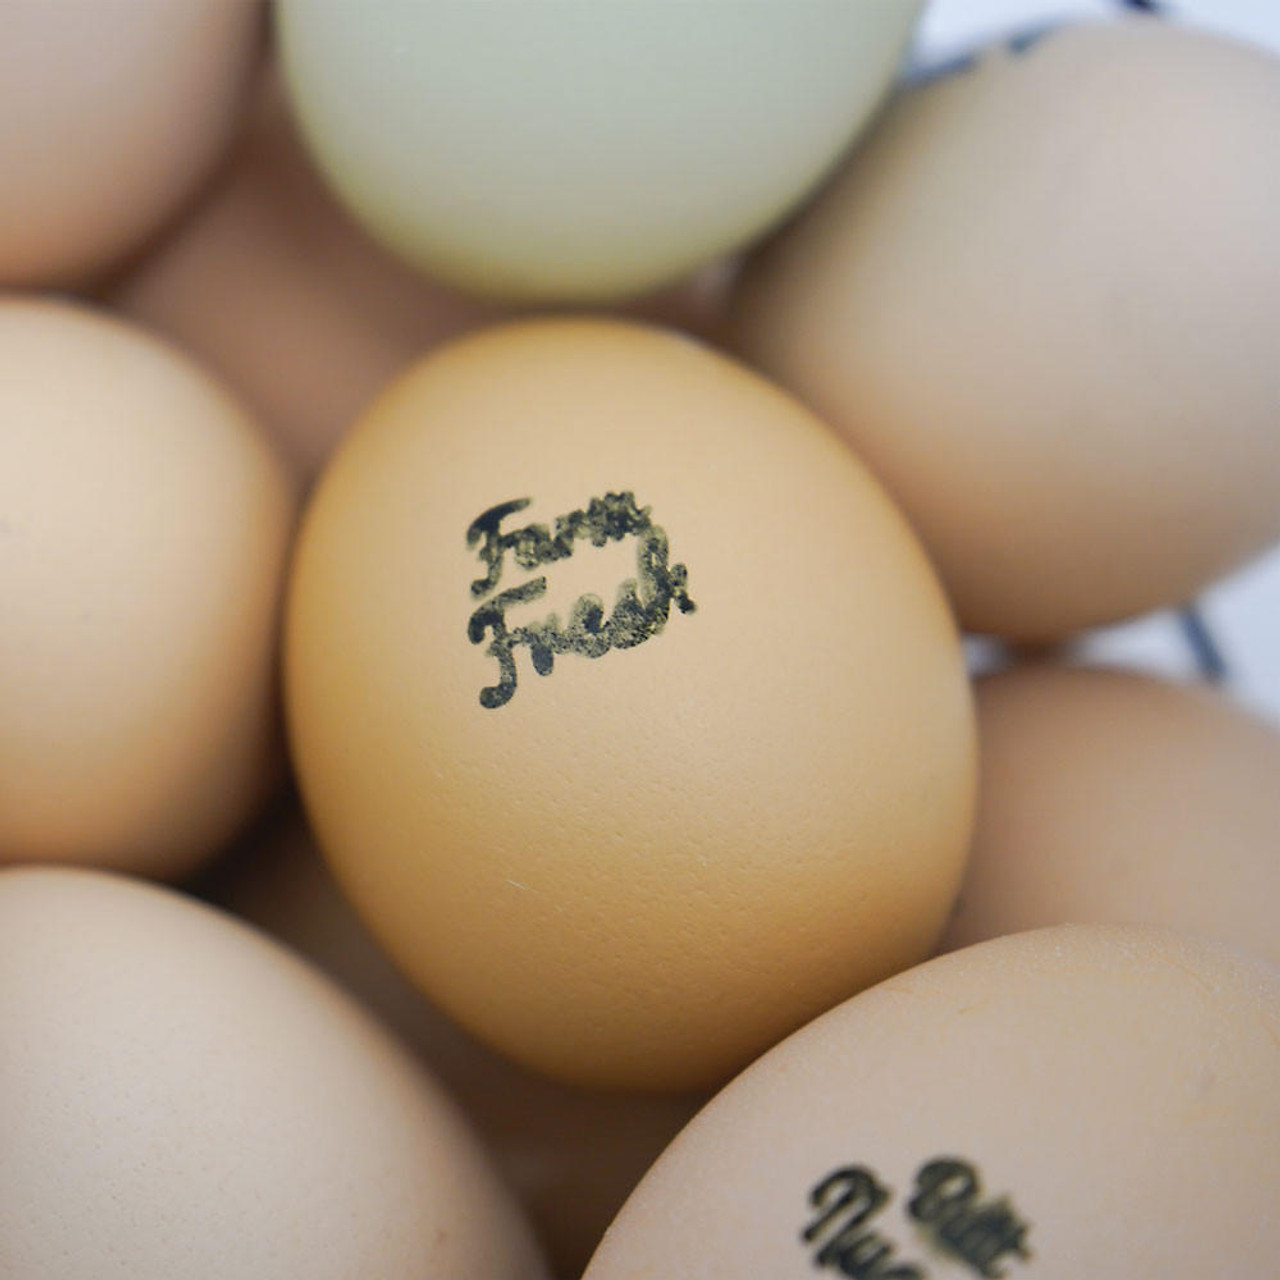 Fresh Eggs Your Name Chicken Hens Egg Stamp